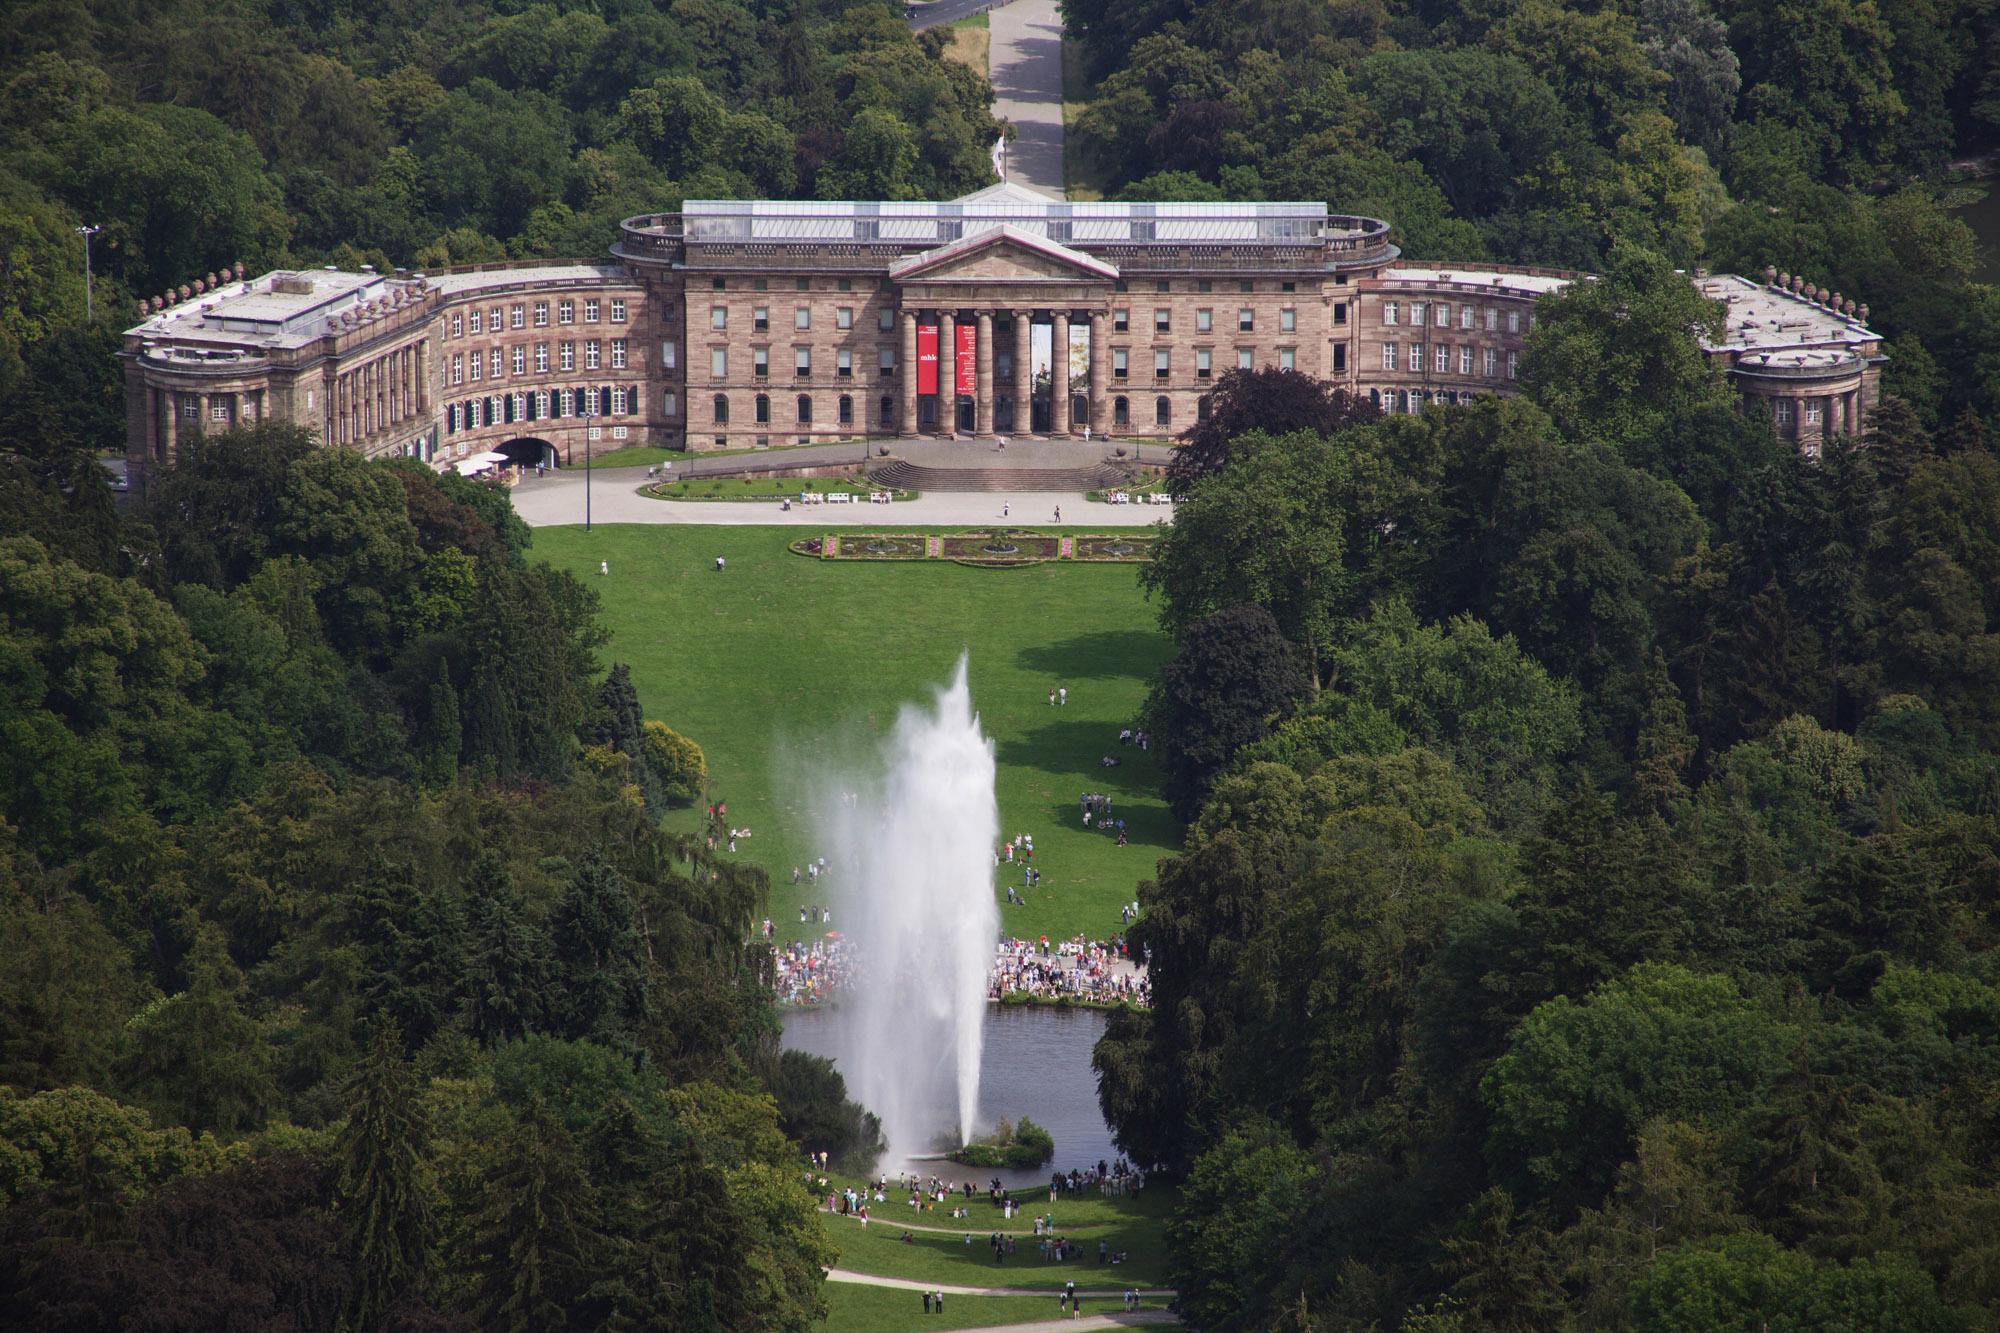 View of Wilhelmshöhe Palace with the Grand Fountain. – © Arno Hensmanns, MHK